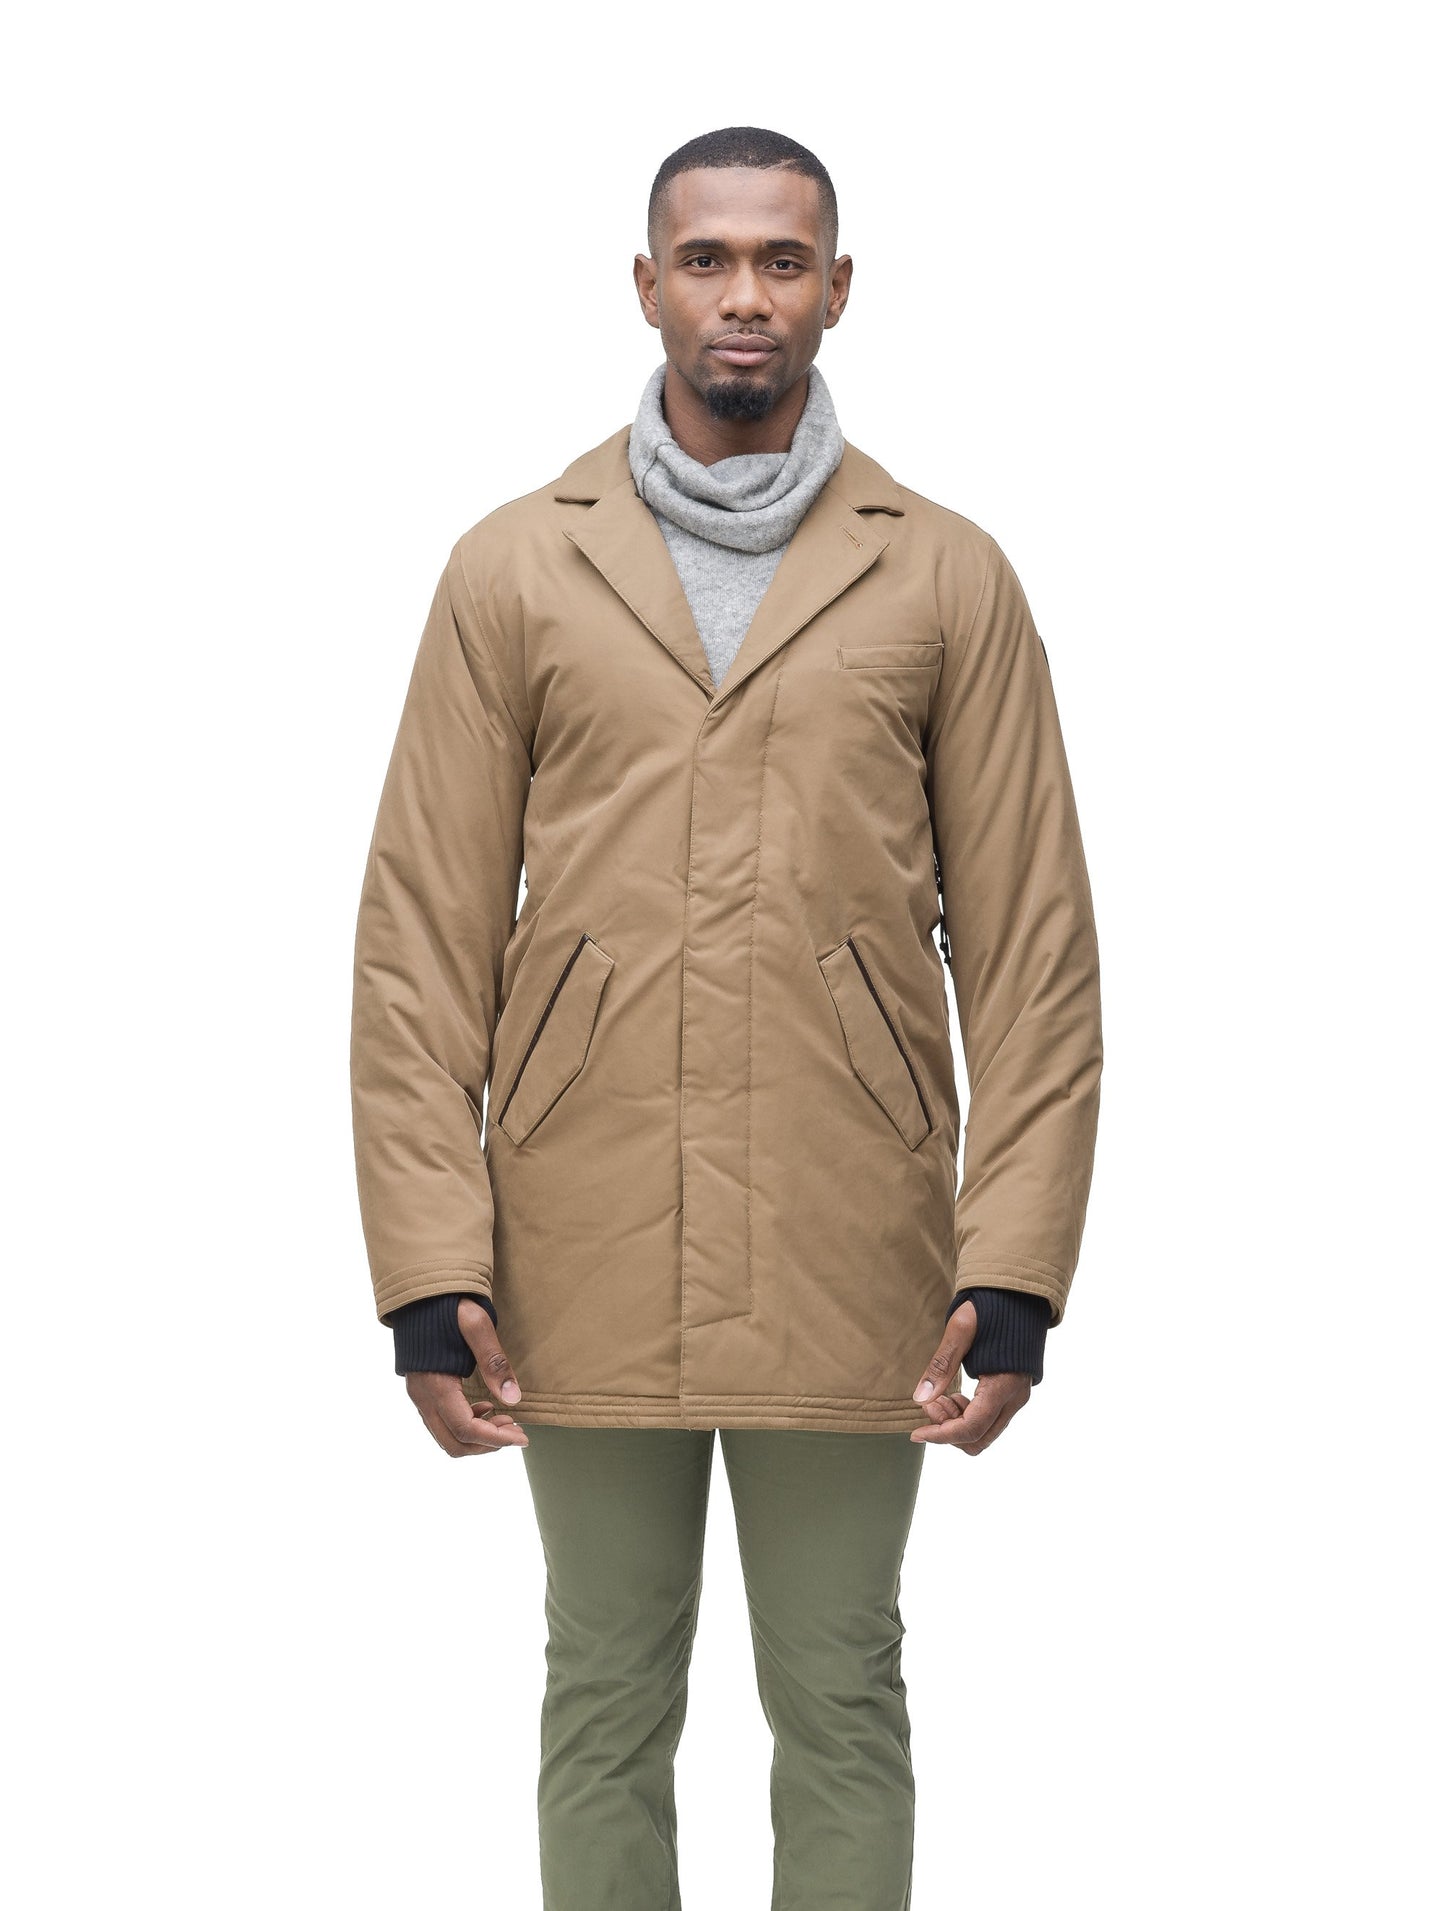 Men's classic overcoat that's lightly down filled, windproof and waterproof in Tan